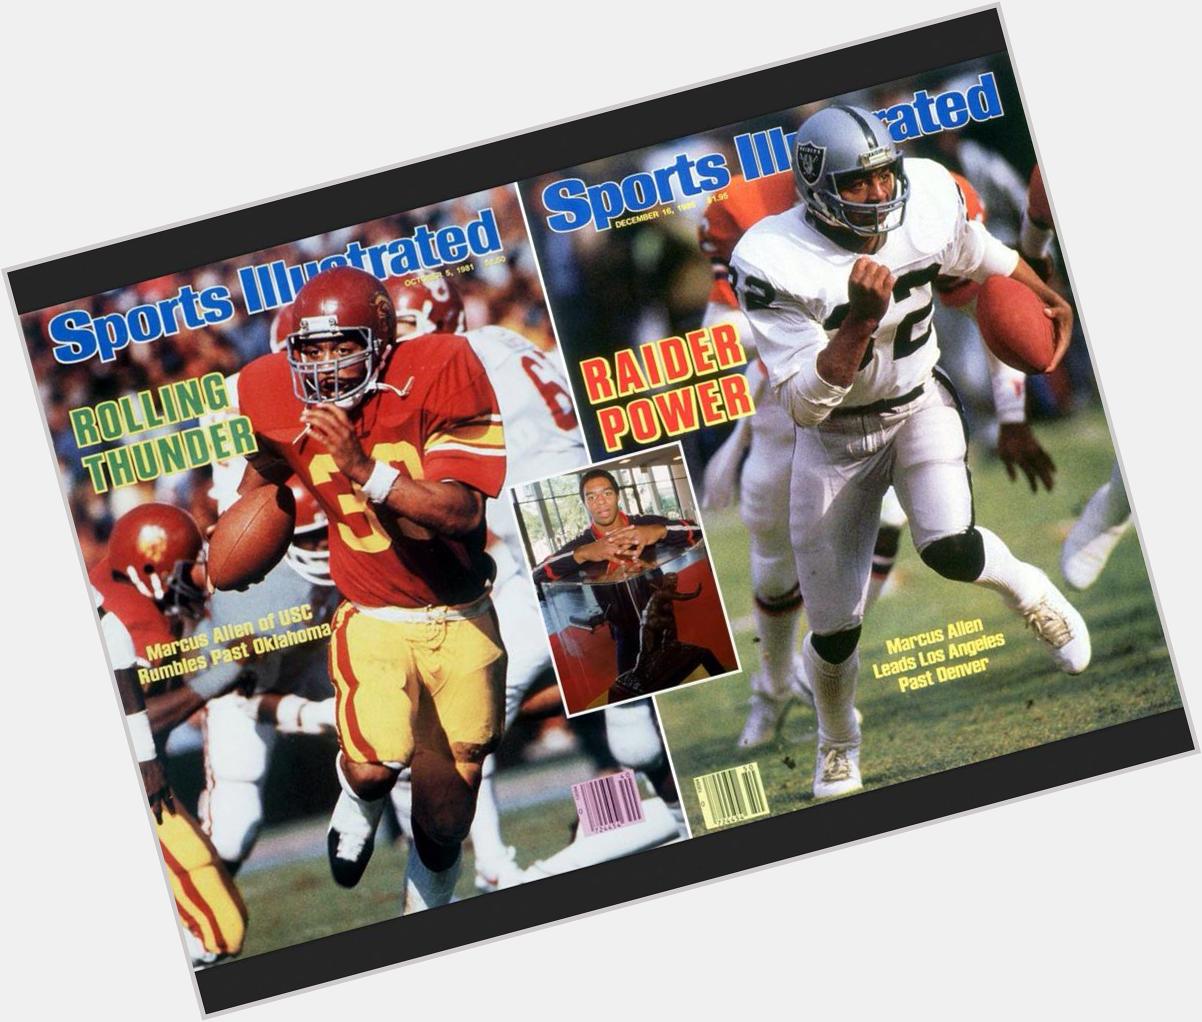 Happy birthday Marcus Allen by siphotos tumblr  nfl running back pro football hall of fame usc 